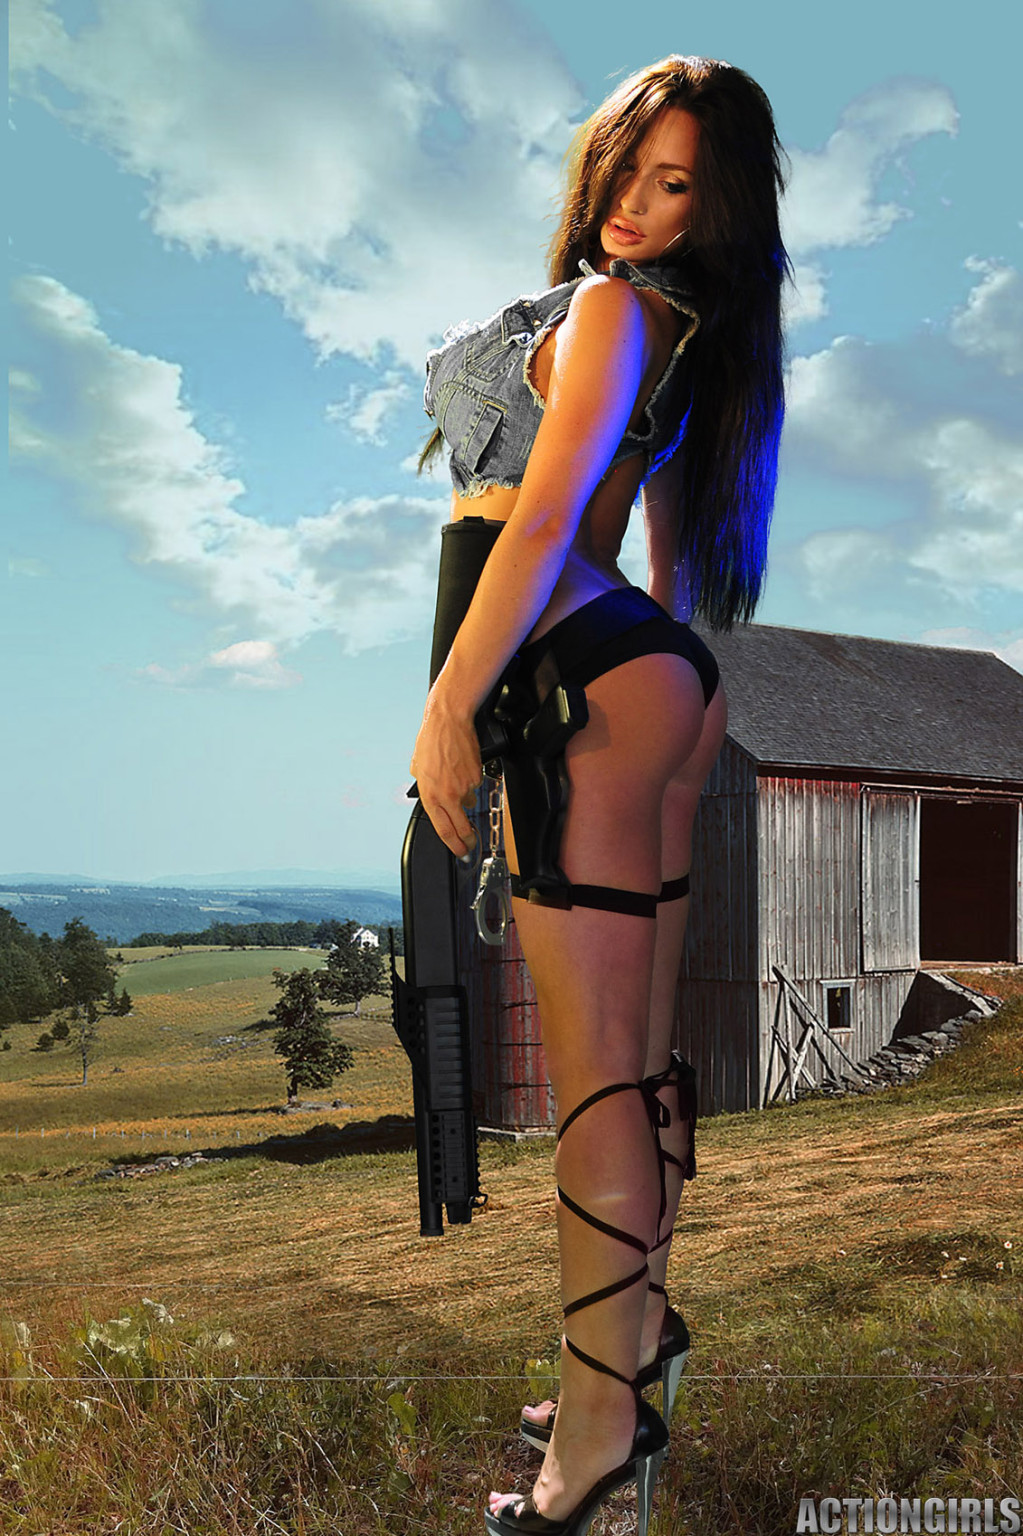 Rosie Revolver Actiongirl picture picture